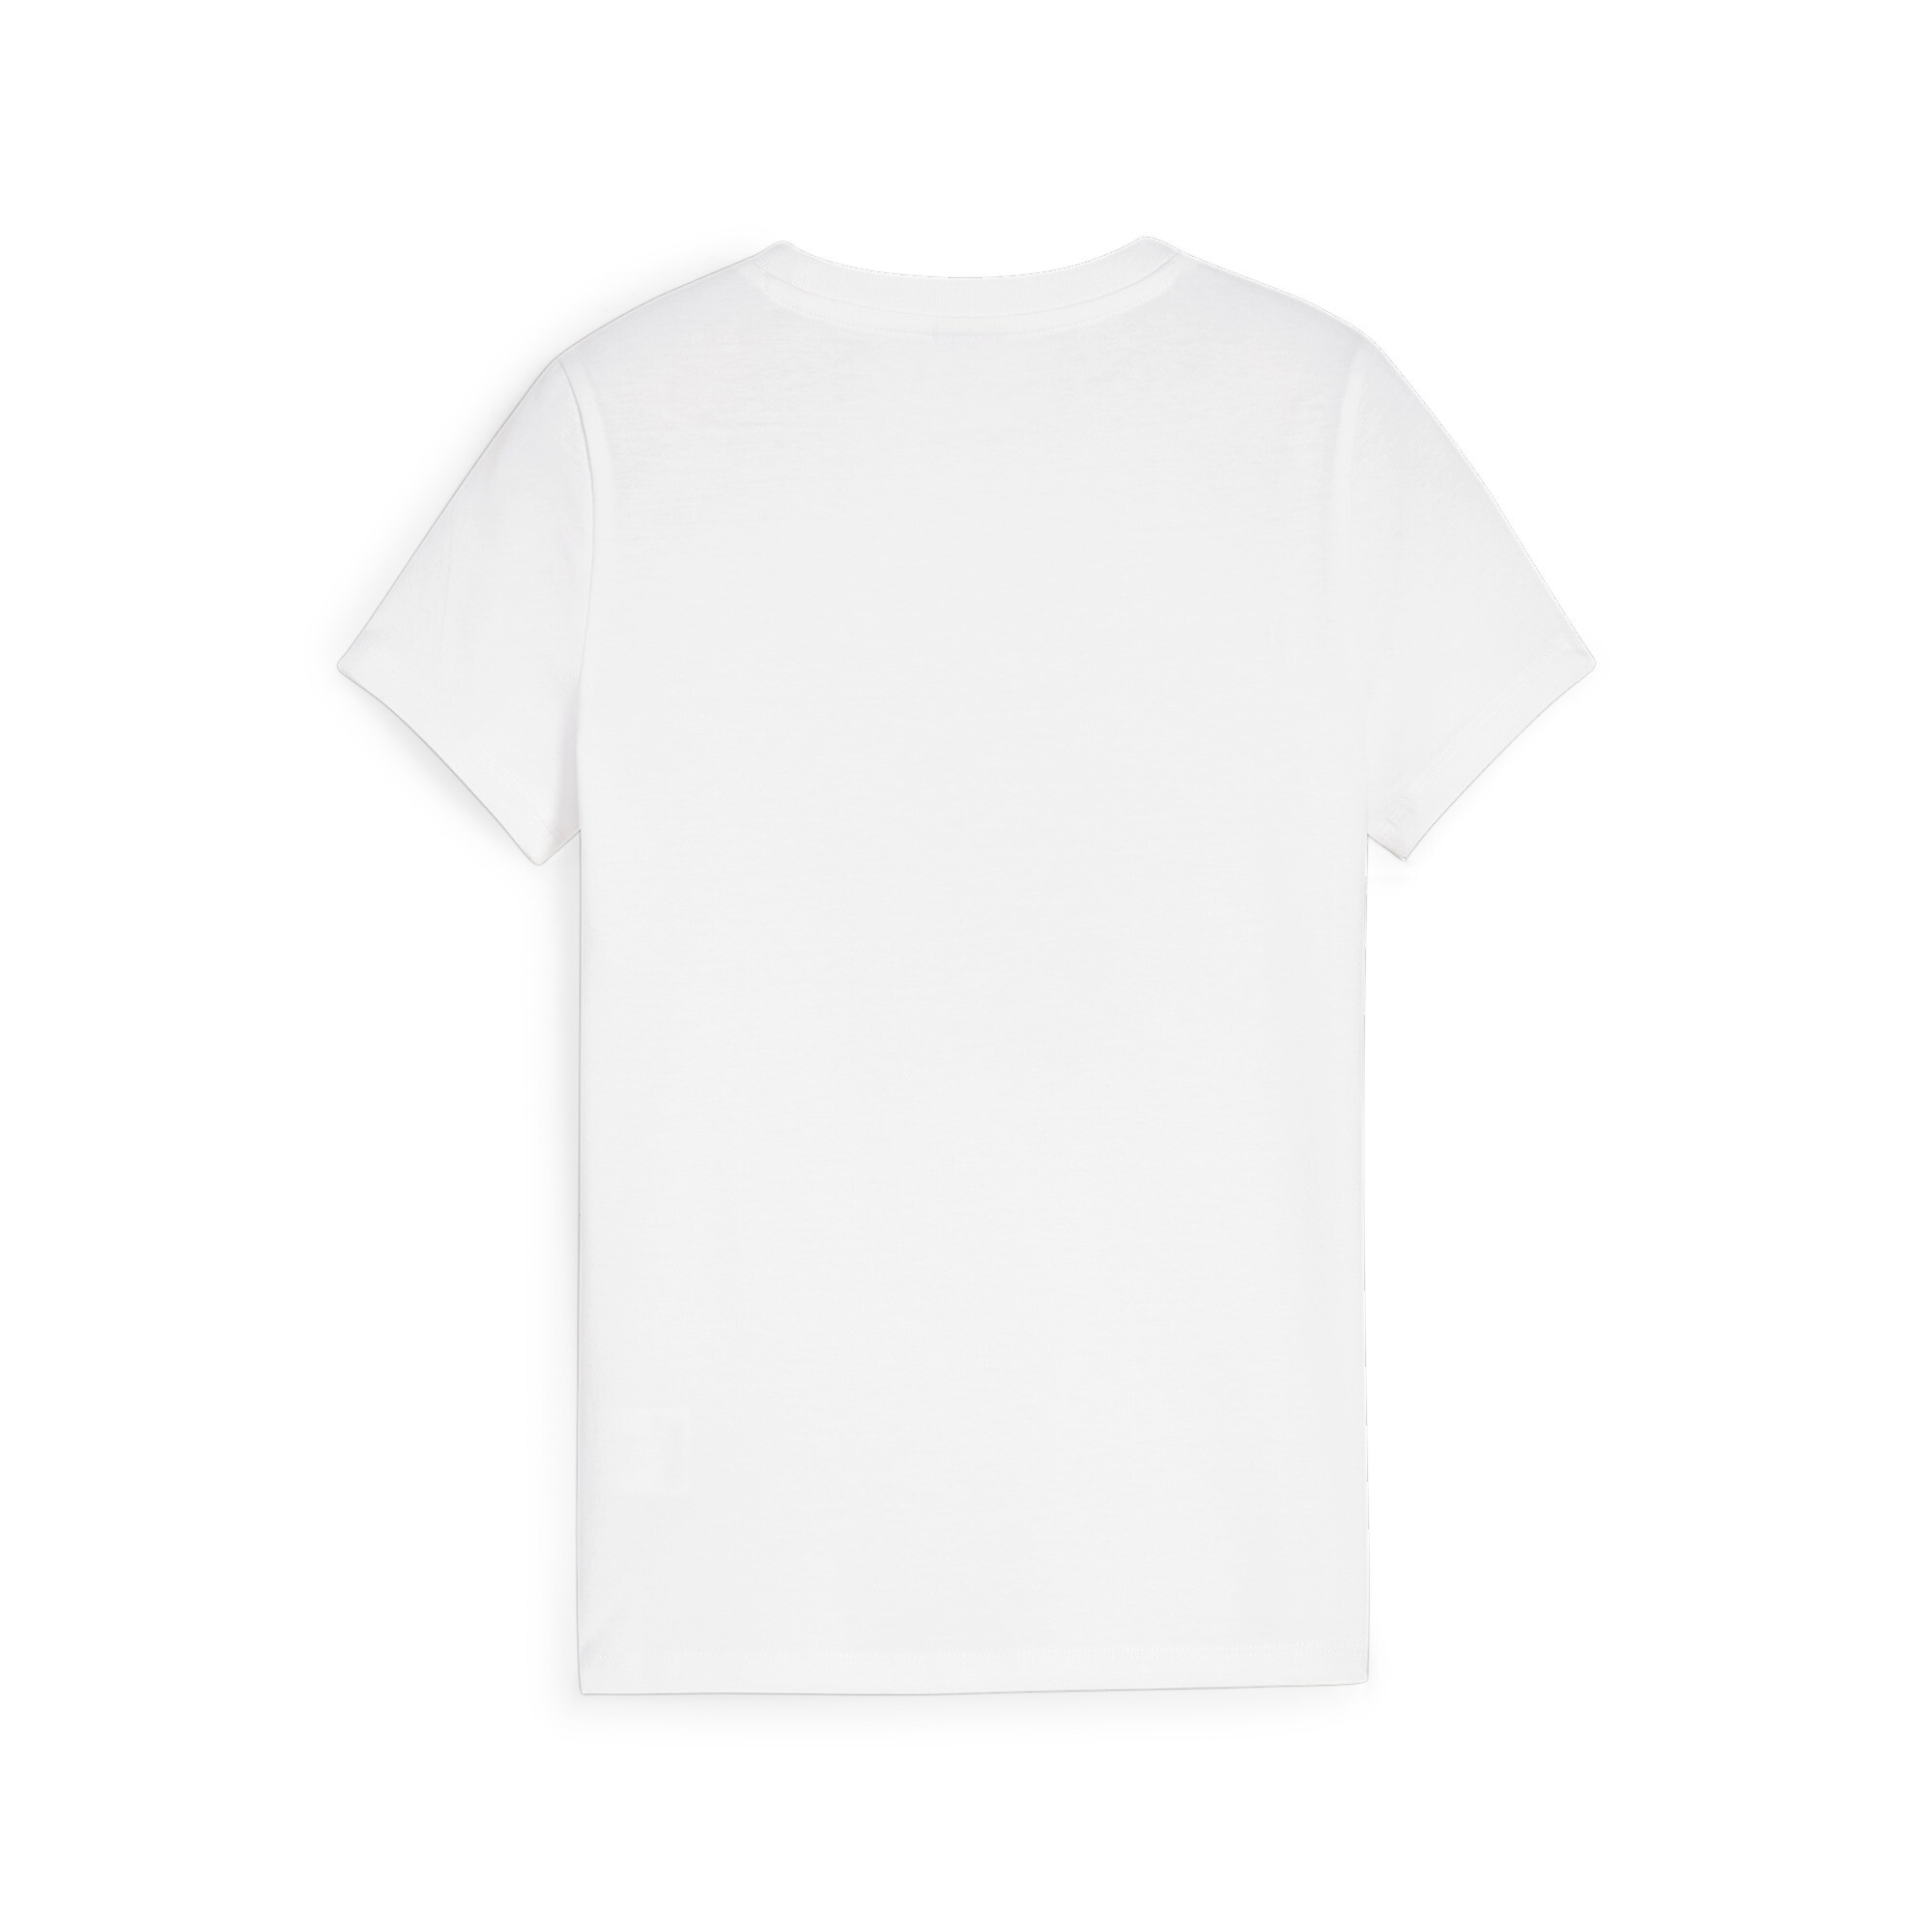 PUMA GRAPHICS MTCH PNT T-Shirt In White, Size 7-8 Youth